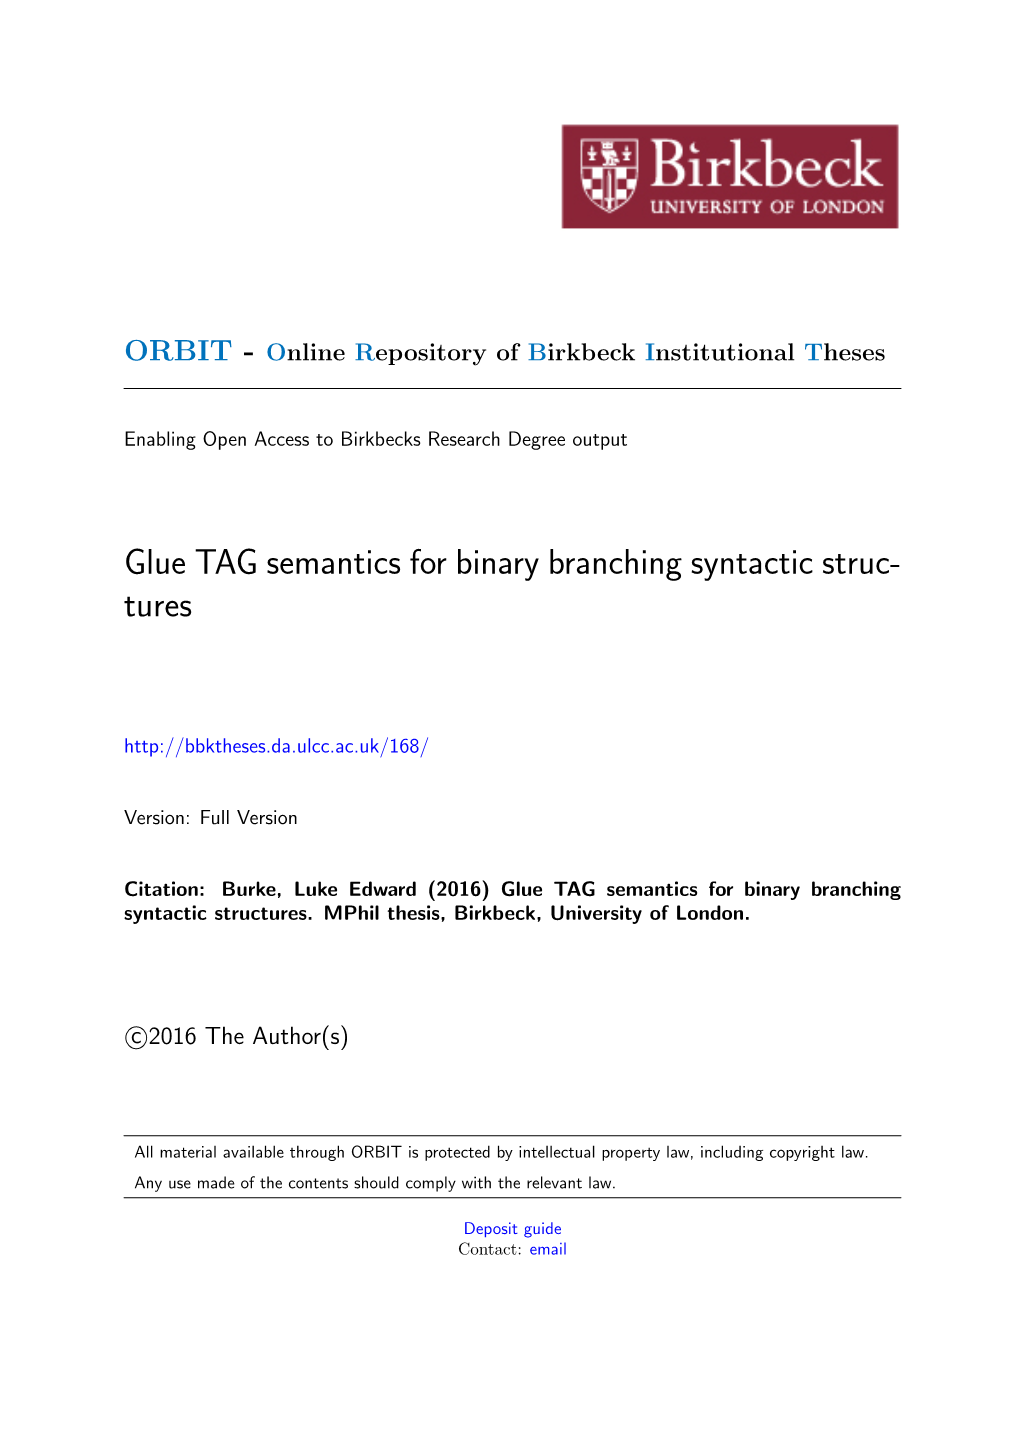 Glue TAG Semantics for Binary Branching Syntactic Struc- Tures